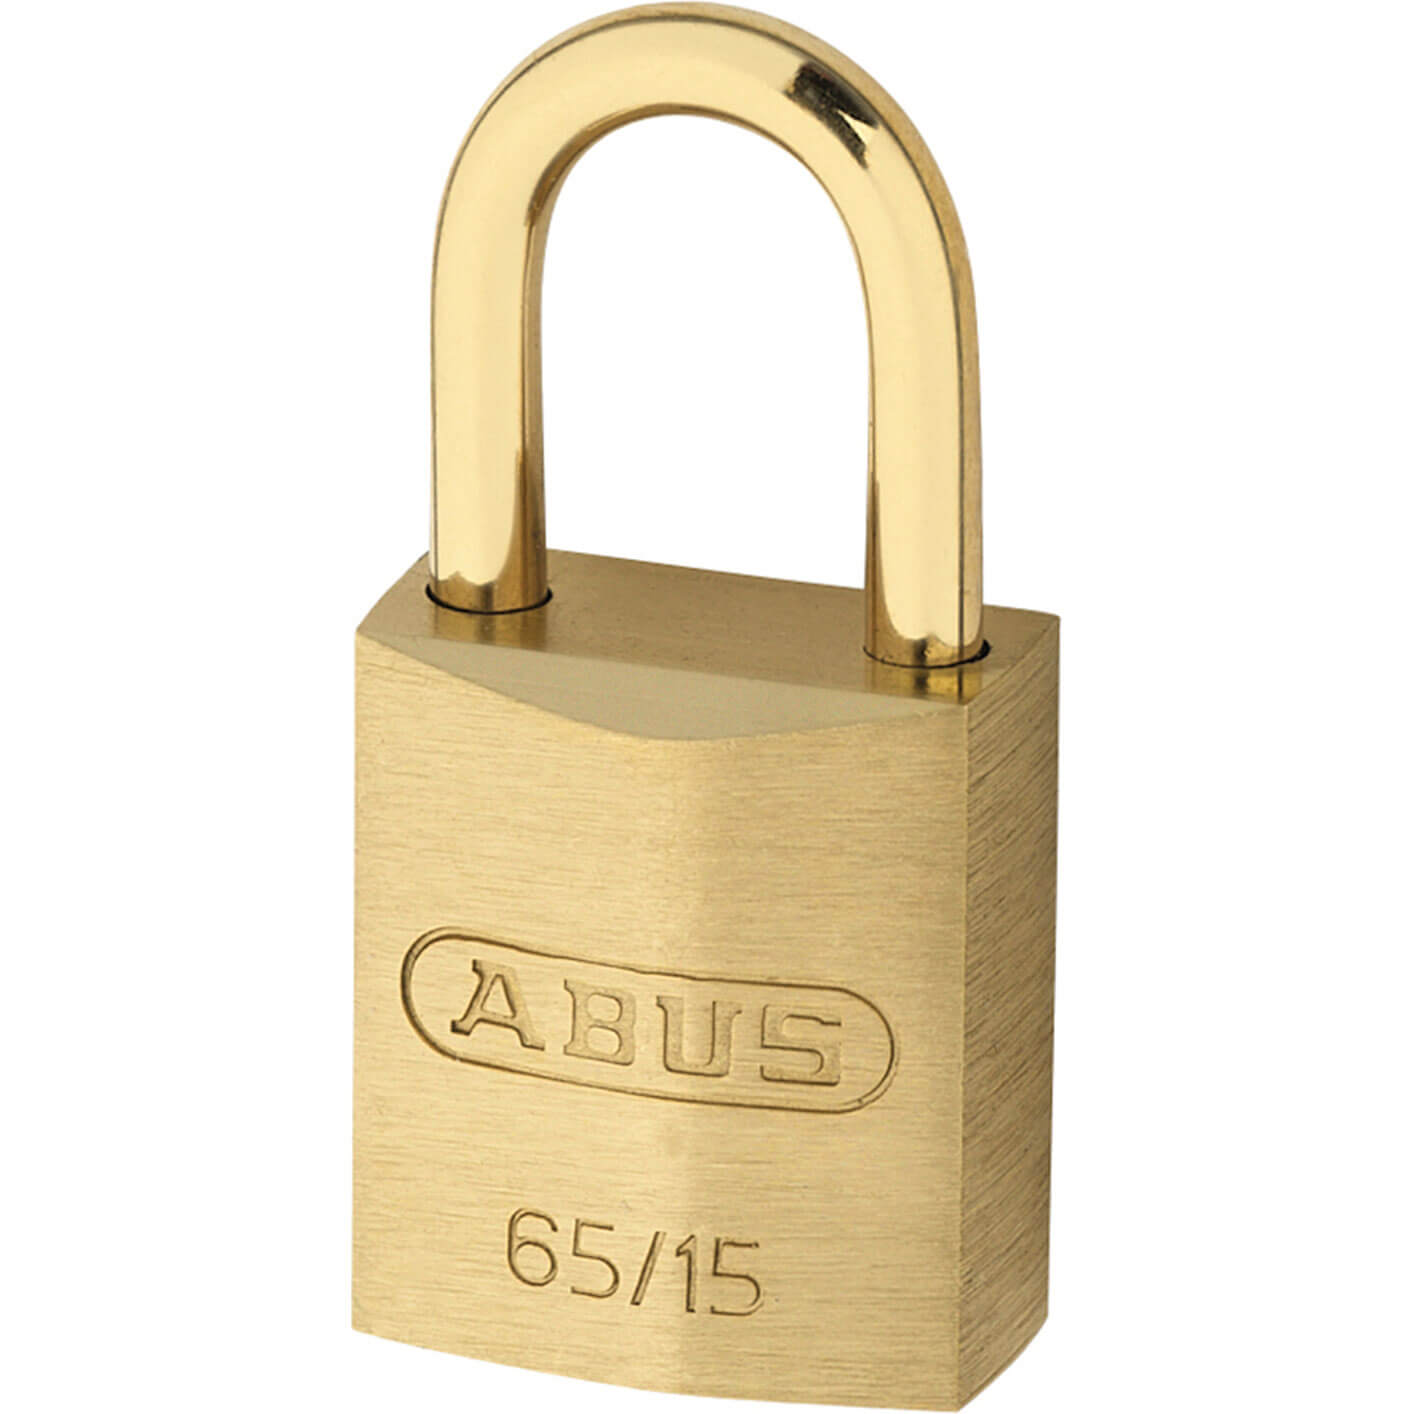 Image of Abus 65 Series Compact Brass Padlock 30mm Extra Long